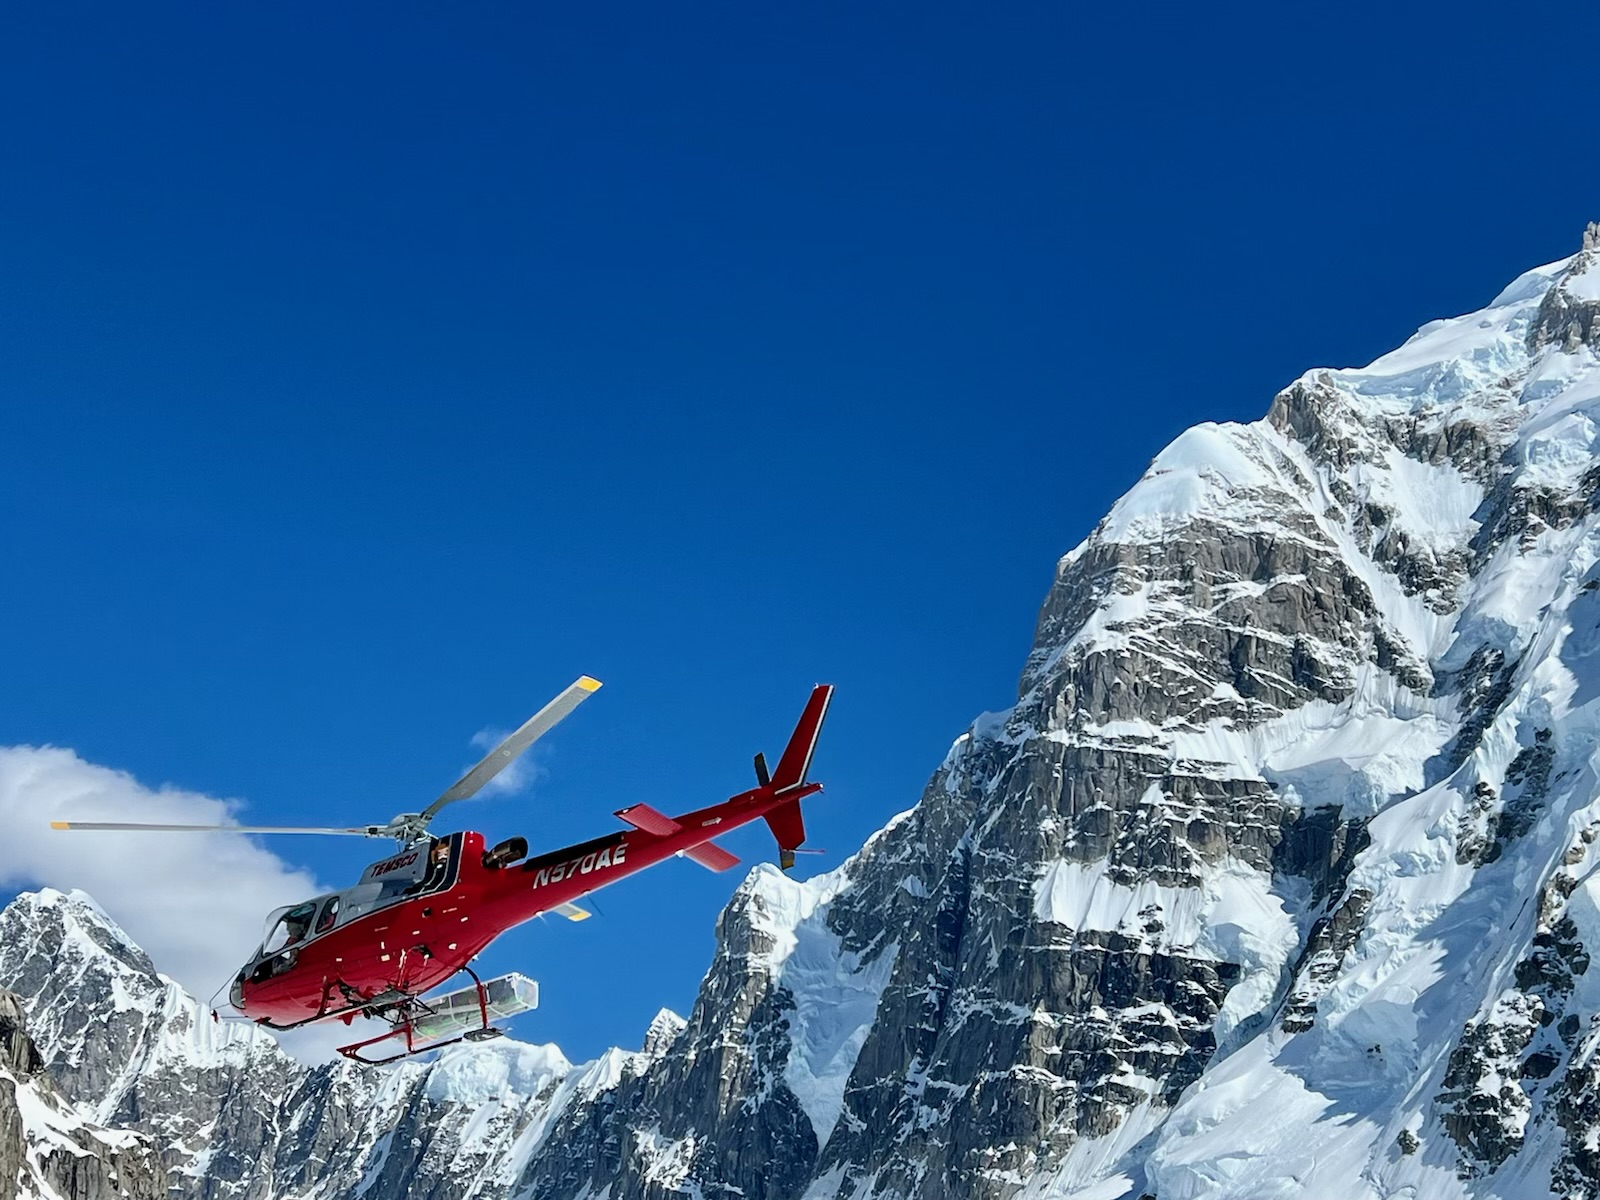 A helicopter flies in bright blue skies along a rock and snow ridge.